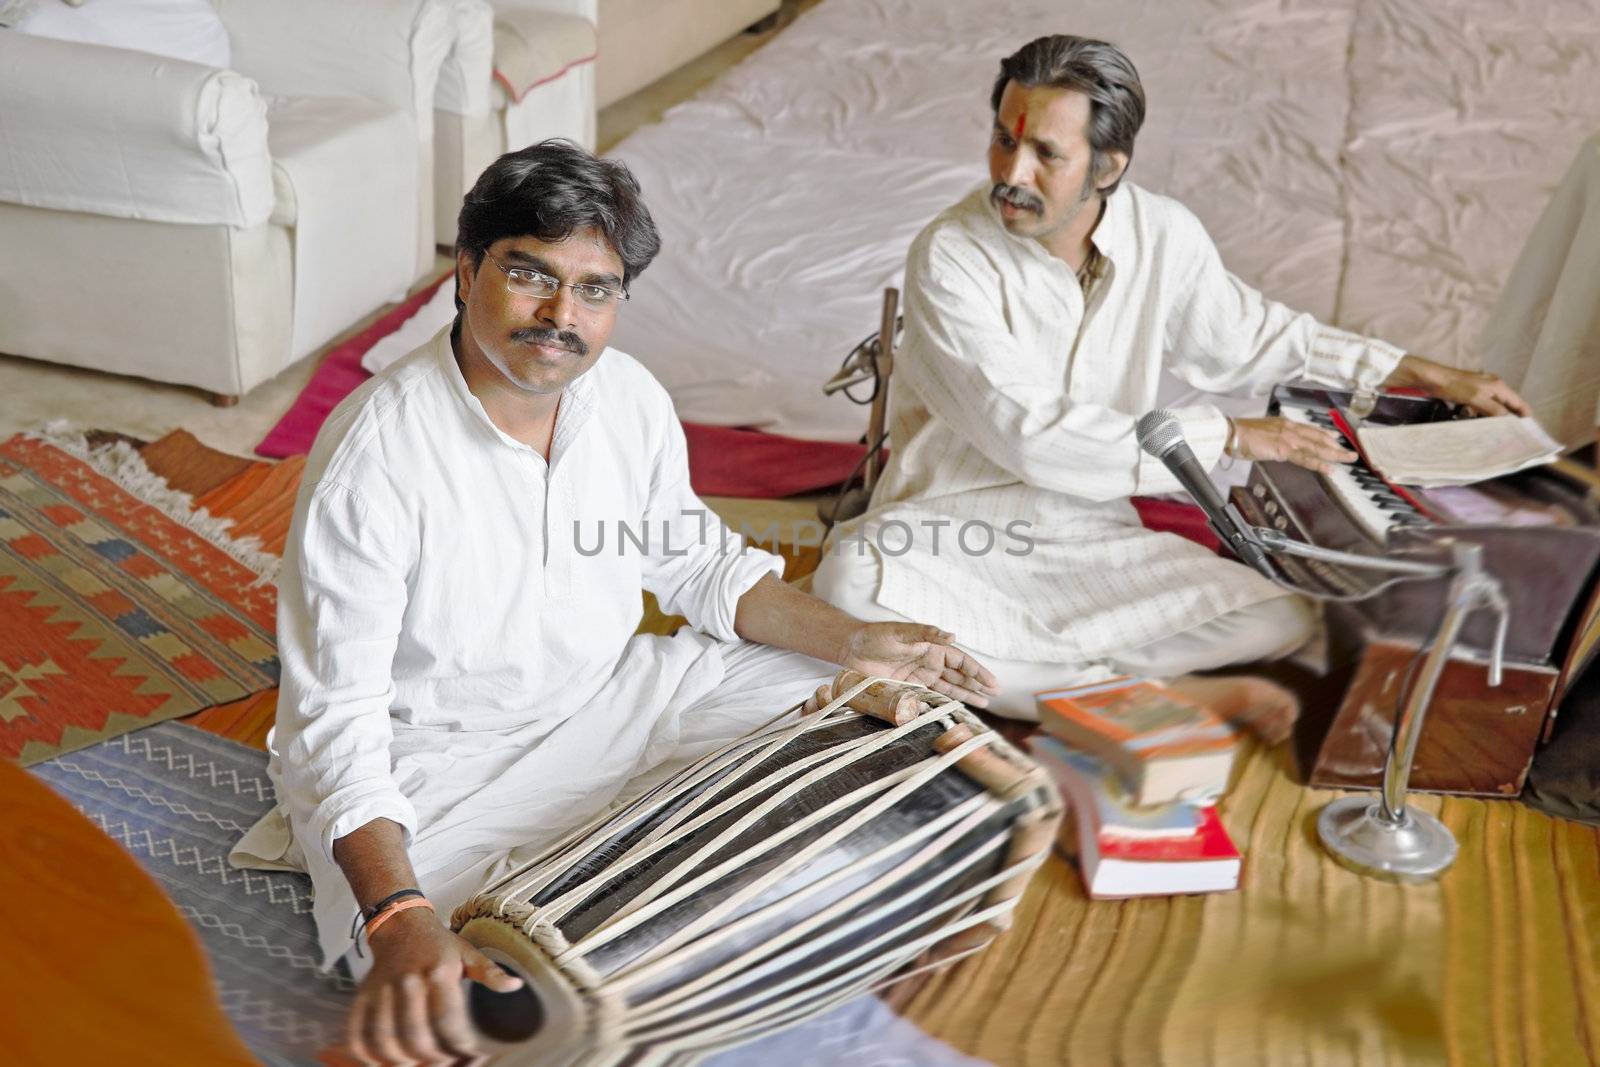 Hanumant Ghadge and Manoj Desai tabla player and singer musician rehearsing at private event April 2012